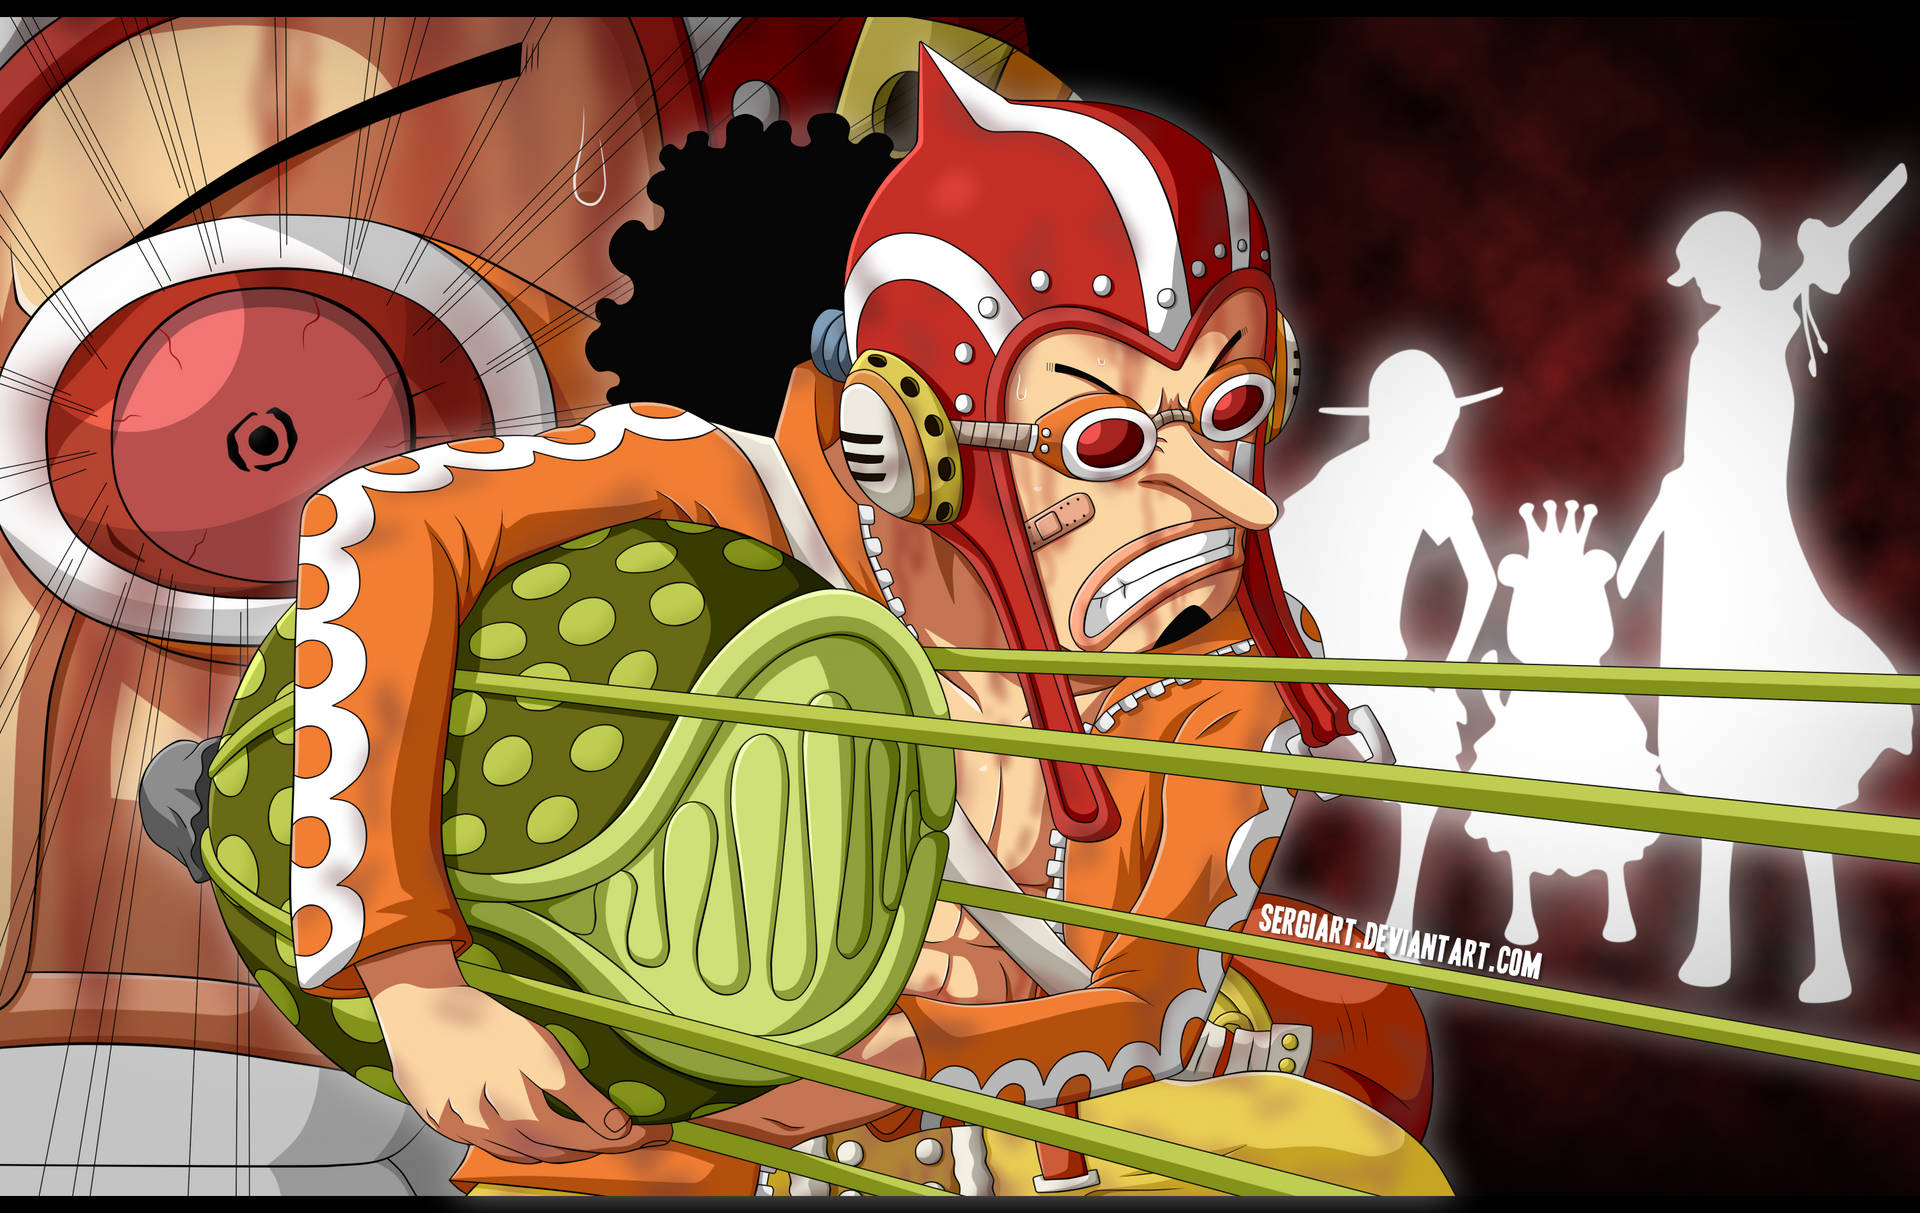 HOW TO GET HAKI, PROJECT: ONE PIECE